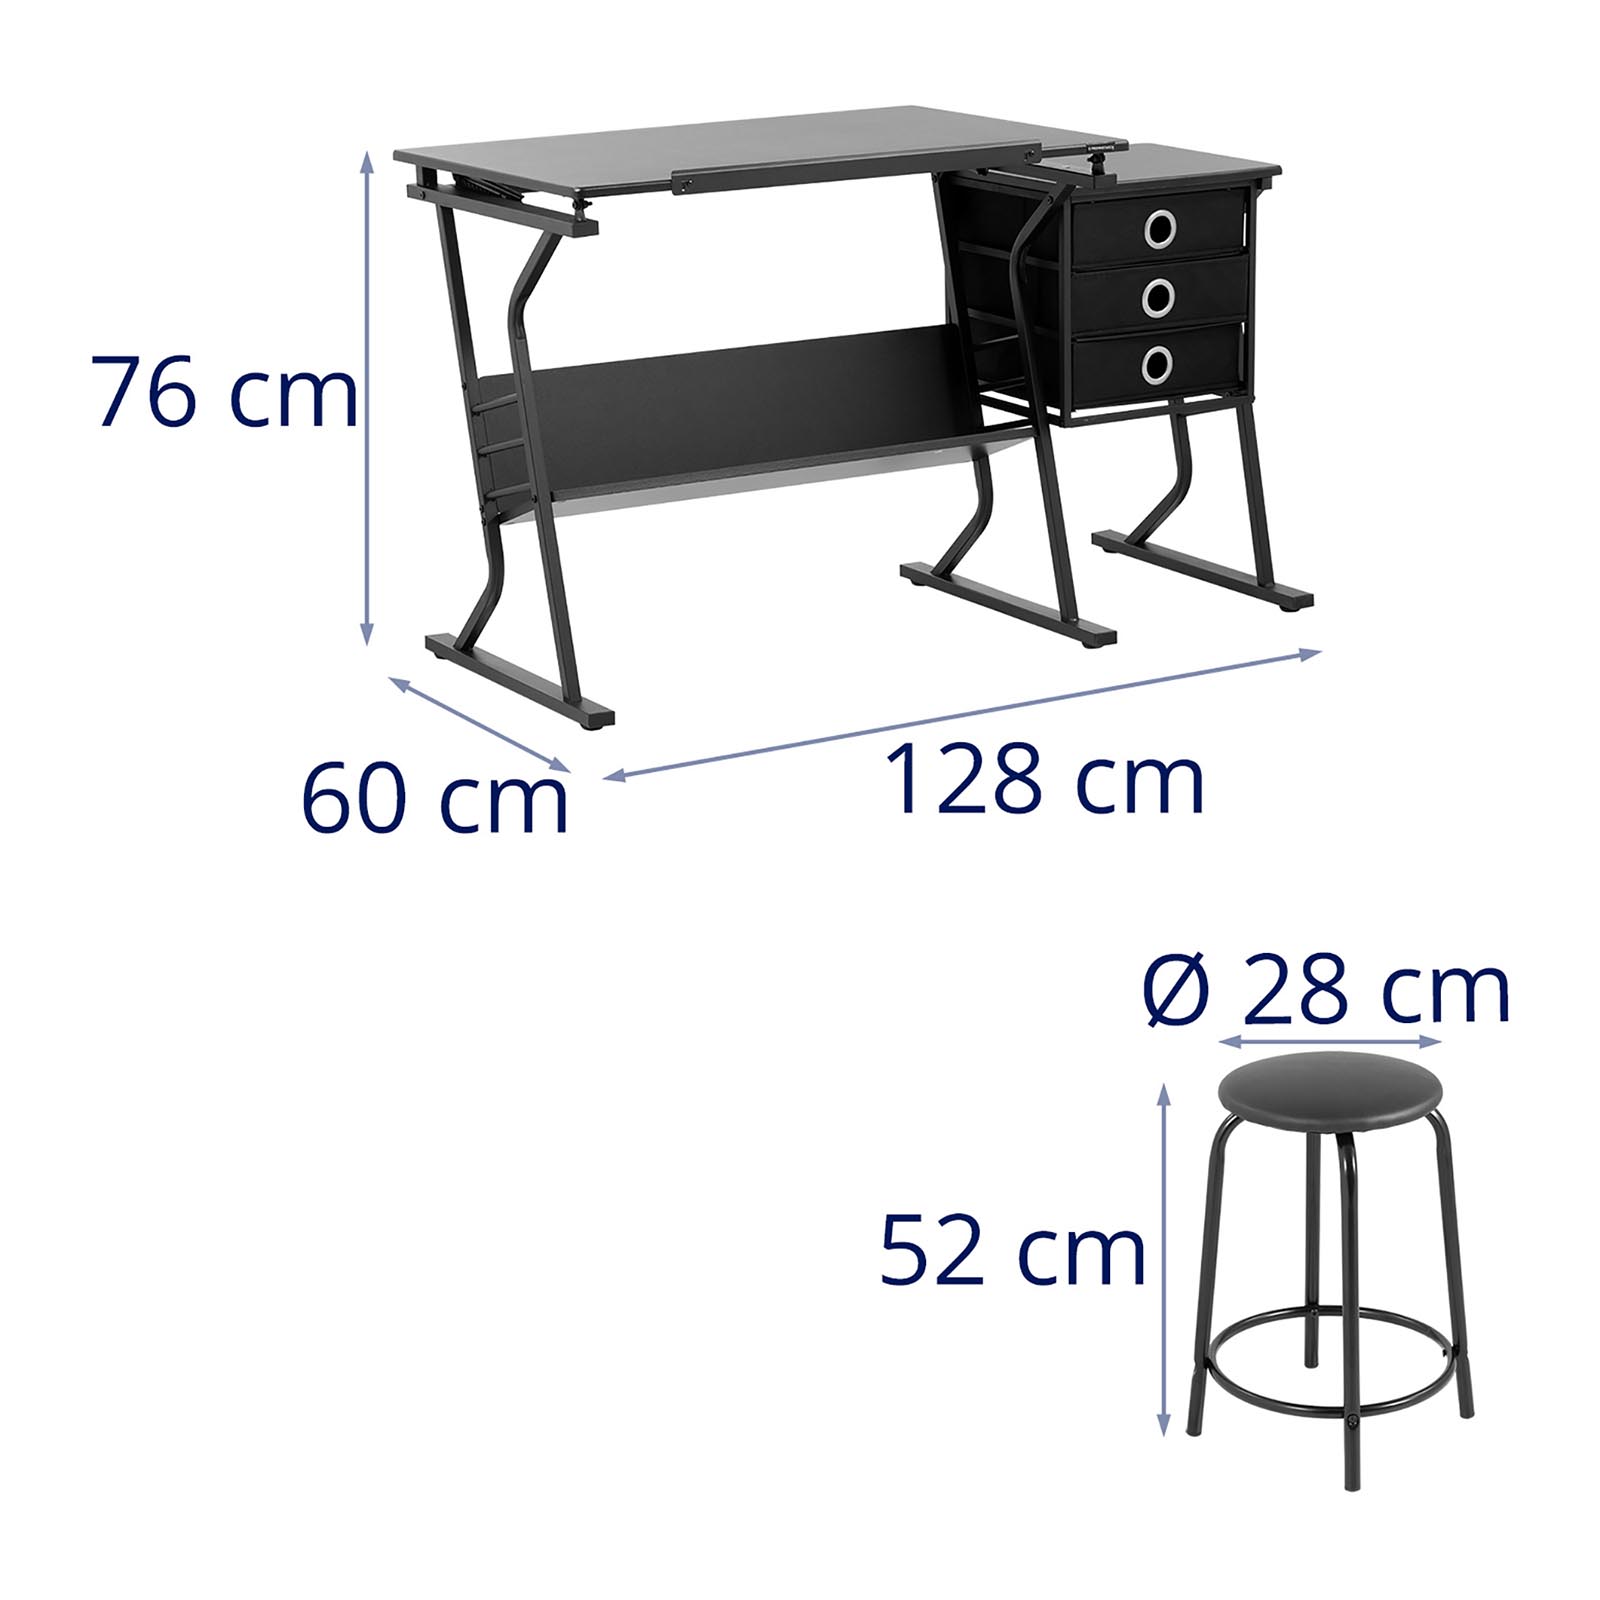 Drawing table - 90 x 60 cm - inclinable - stool and side table